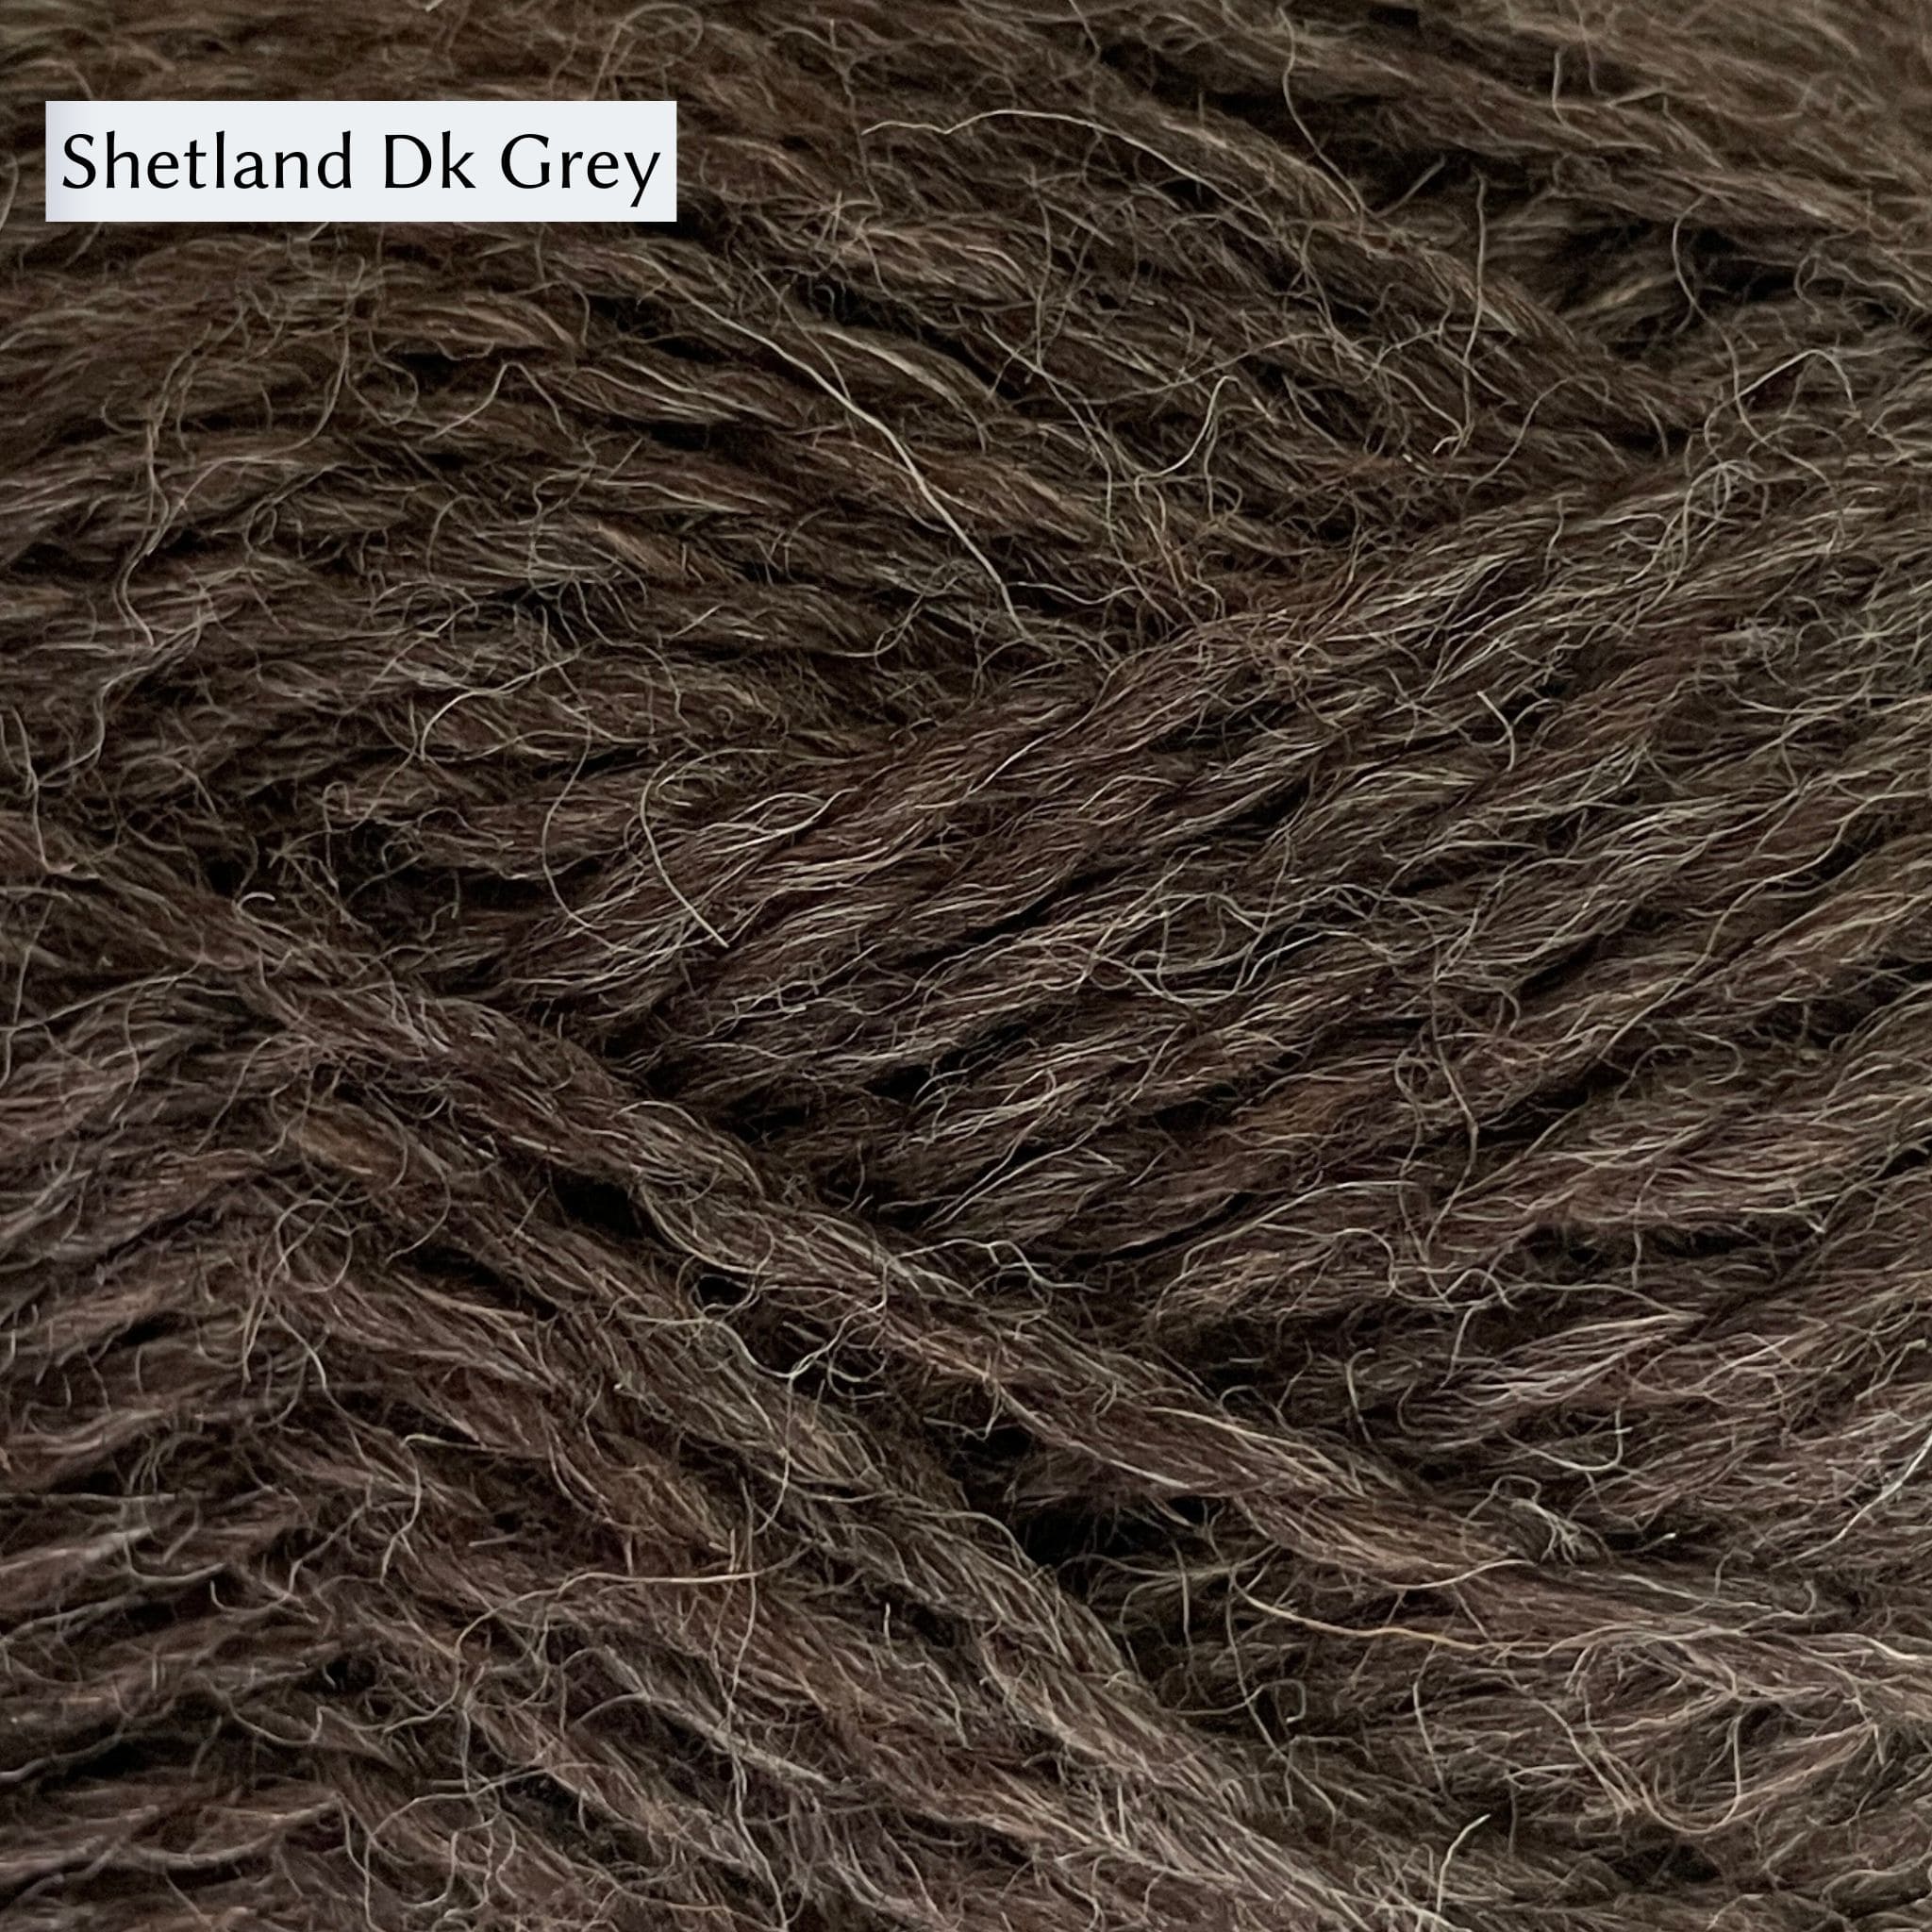 Jamieson & Smith Aran Worsted Yarn close up photo of Shetlang Dk Grey Colorway which is a dark brown color.